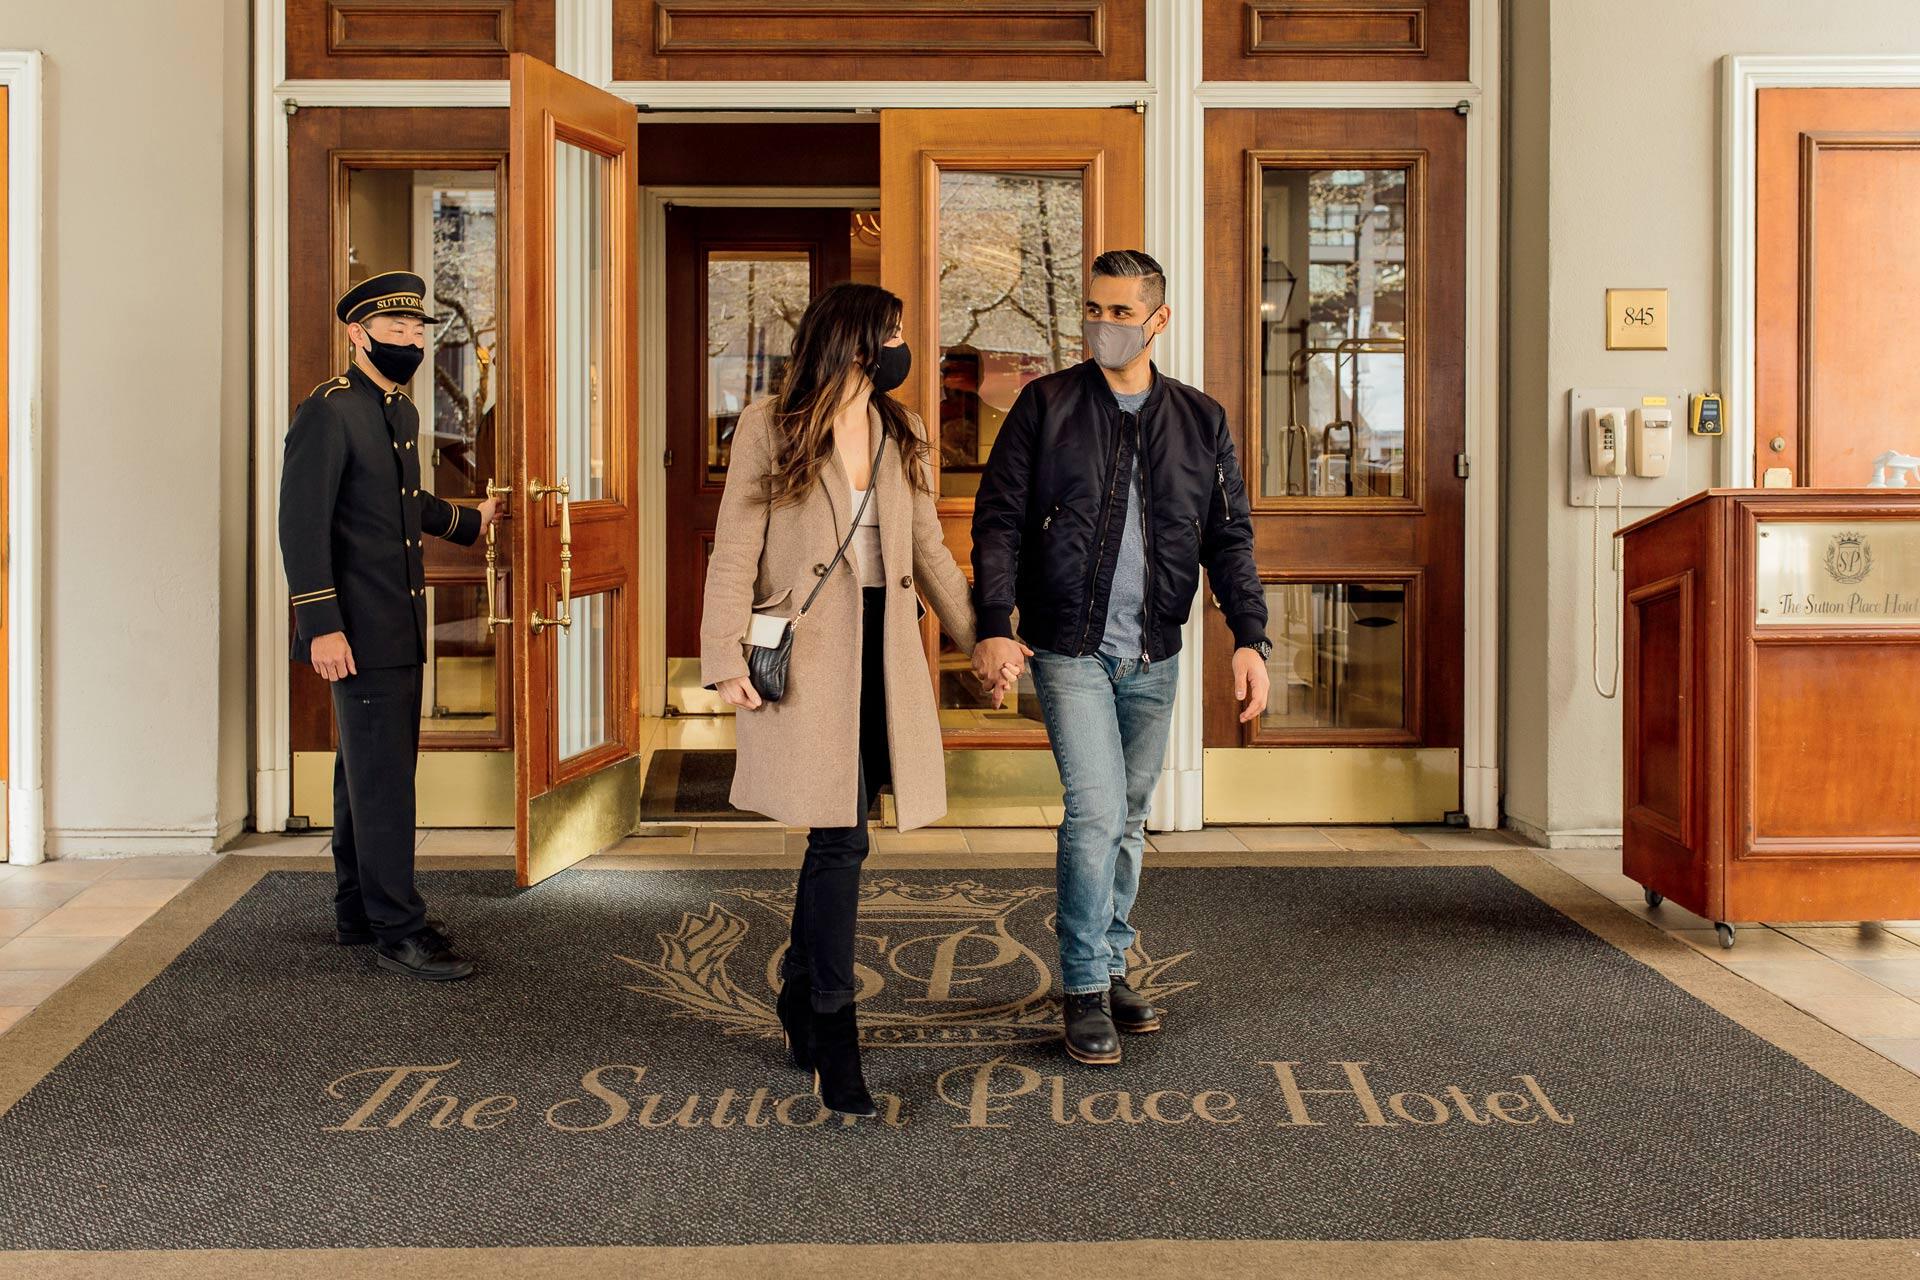 The Sutton Place Hotels | Luxury Hotels Across Canada